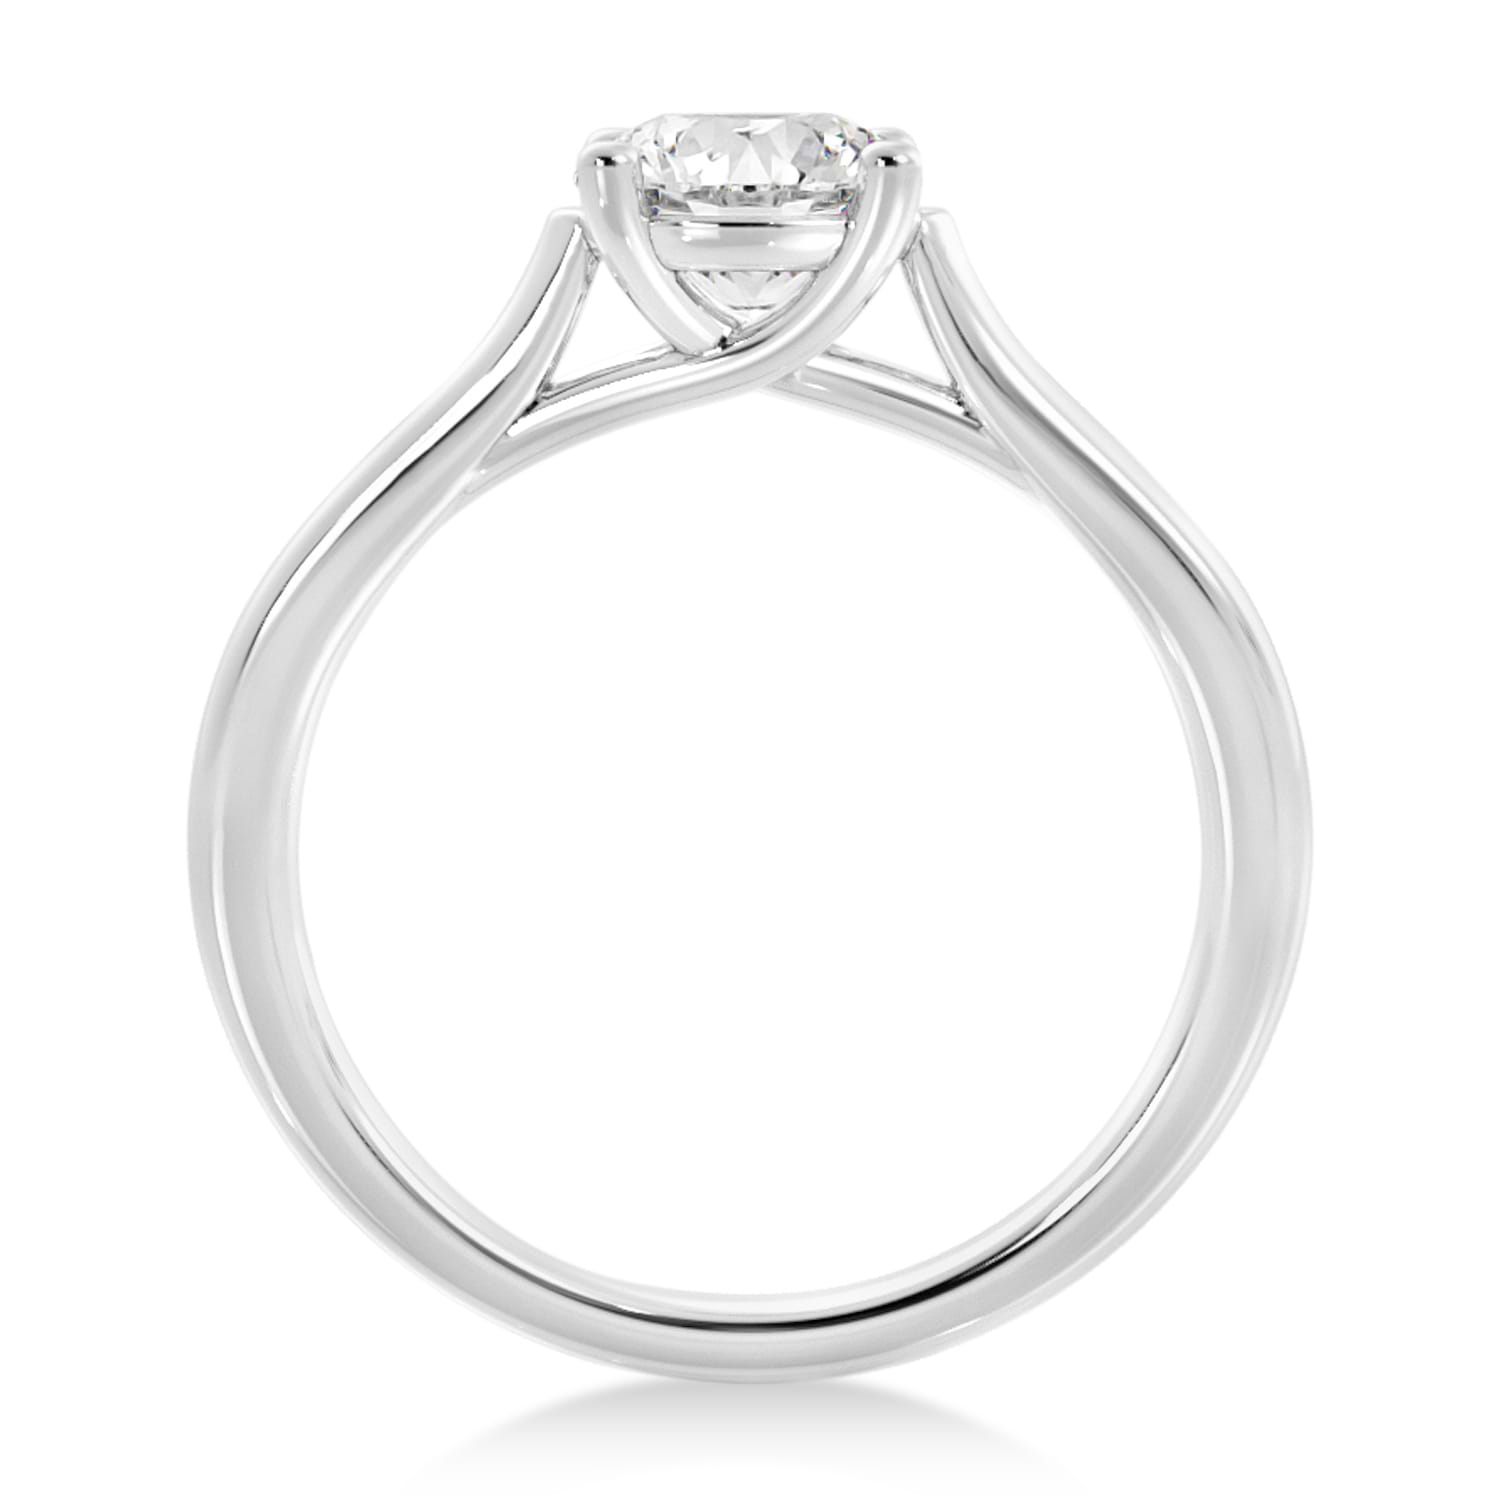 Lab Grown  Solitaire Engagement Ring 14k White Gold